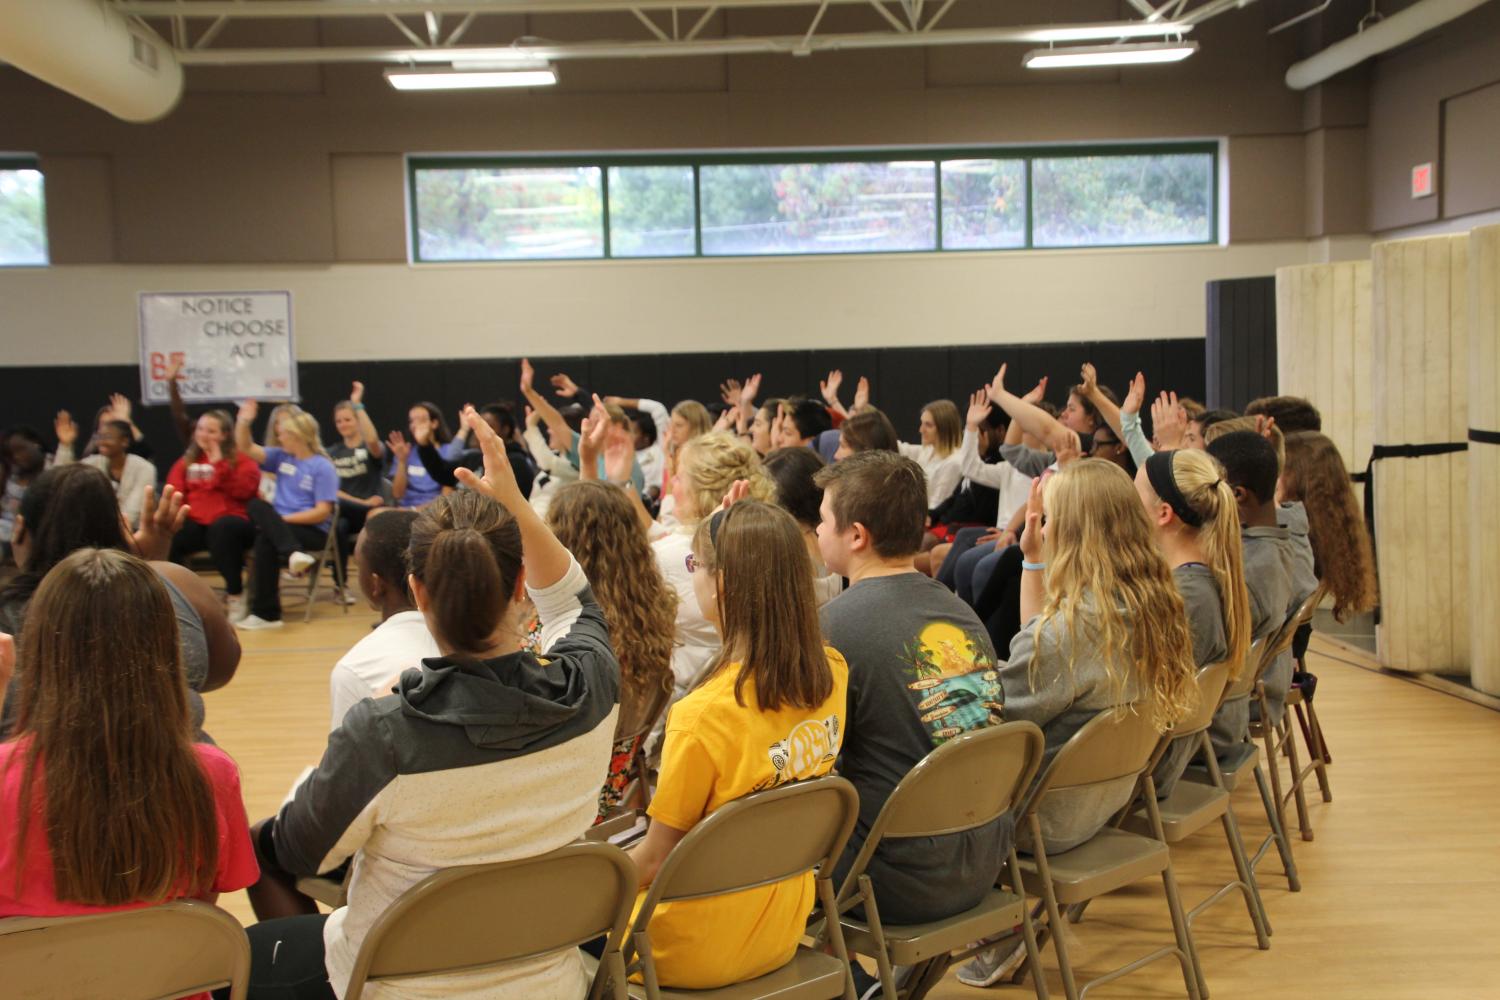 When asked if they have ever been a part of gossip and rumors, nearly every student in the room raises their hand.